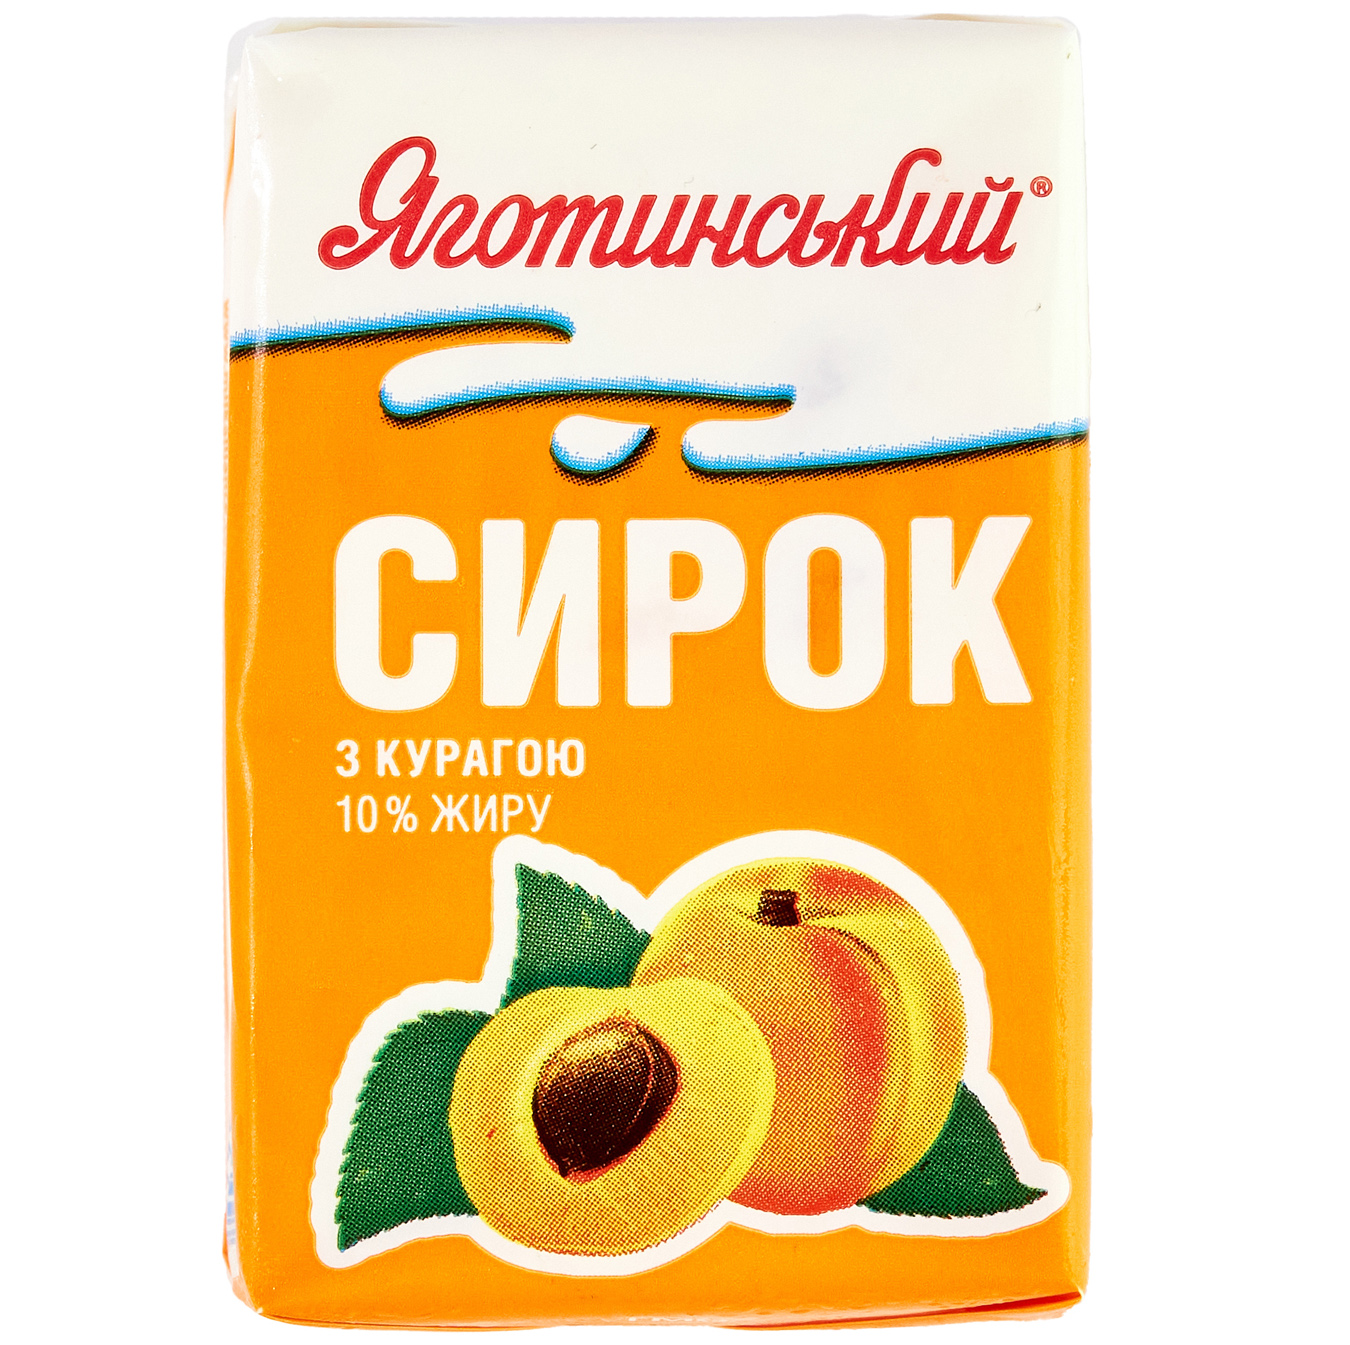 Yagotynsky Cottage Cheese with Apricots 10% 90g